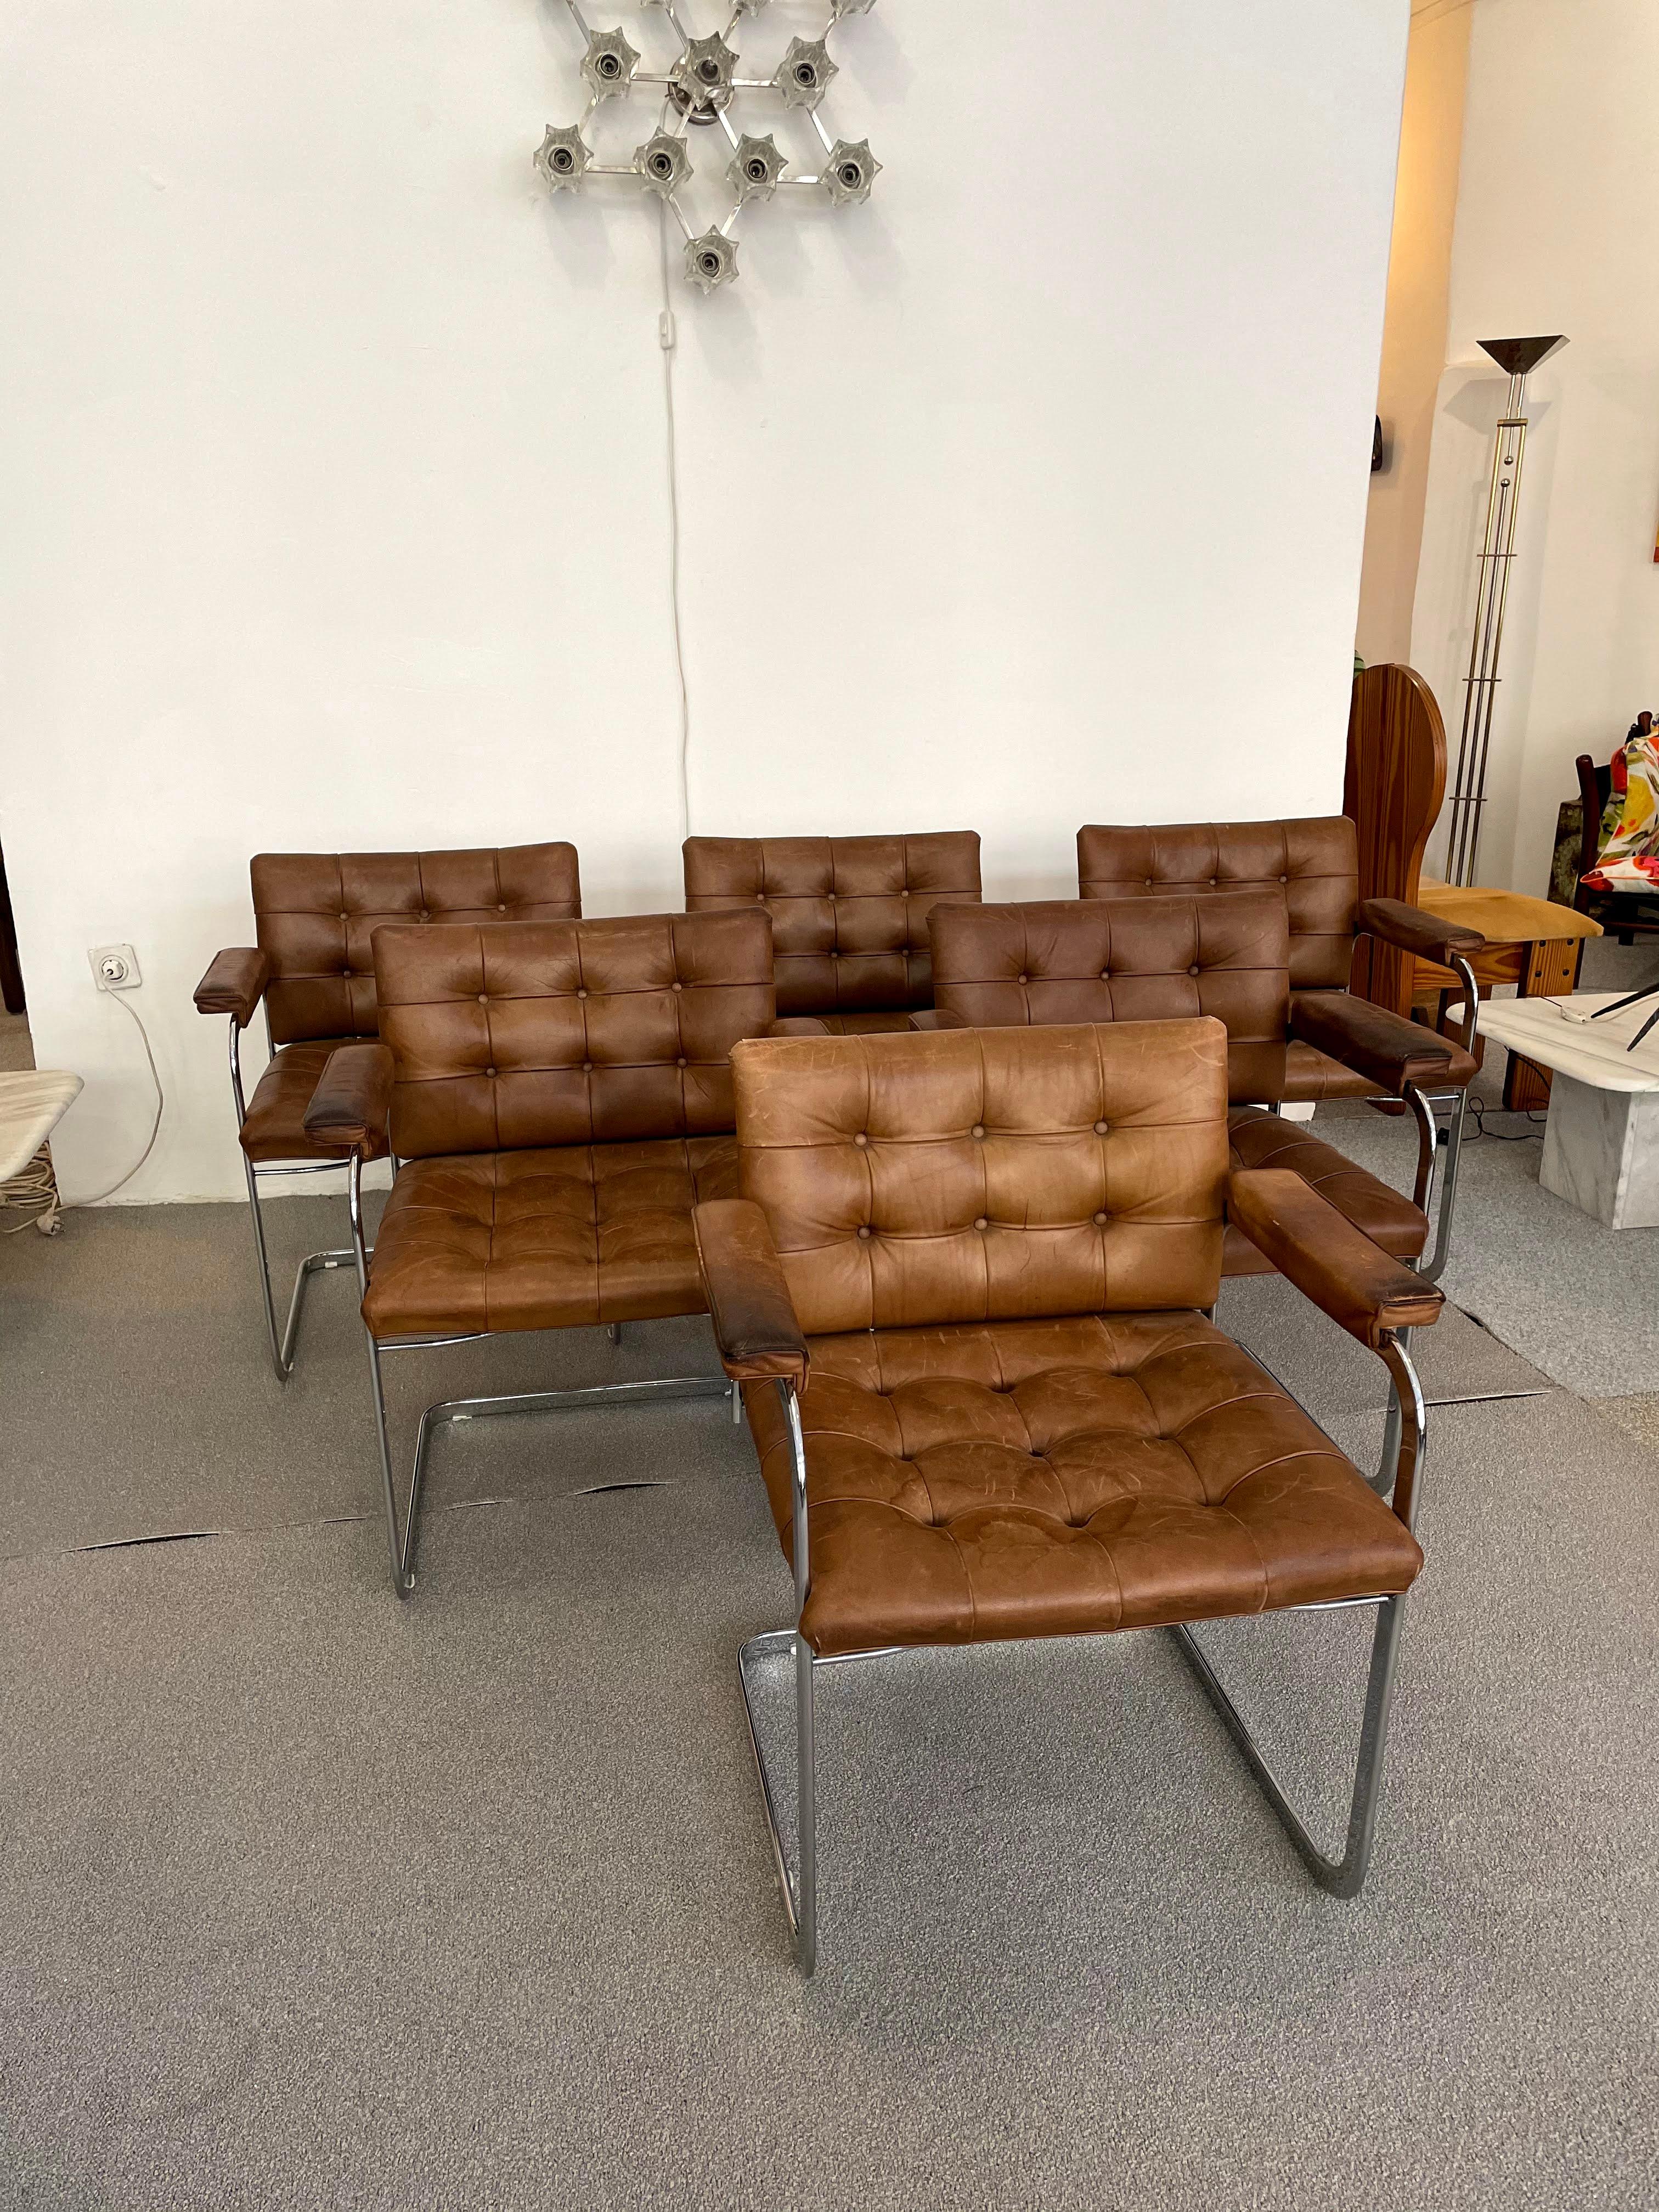 A rare set of six RH-305 armchairs designed by Robert Haussman and manufactured by De Sede. Made in Switzerland, they date from circa 1960s.